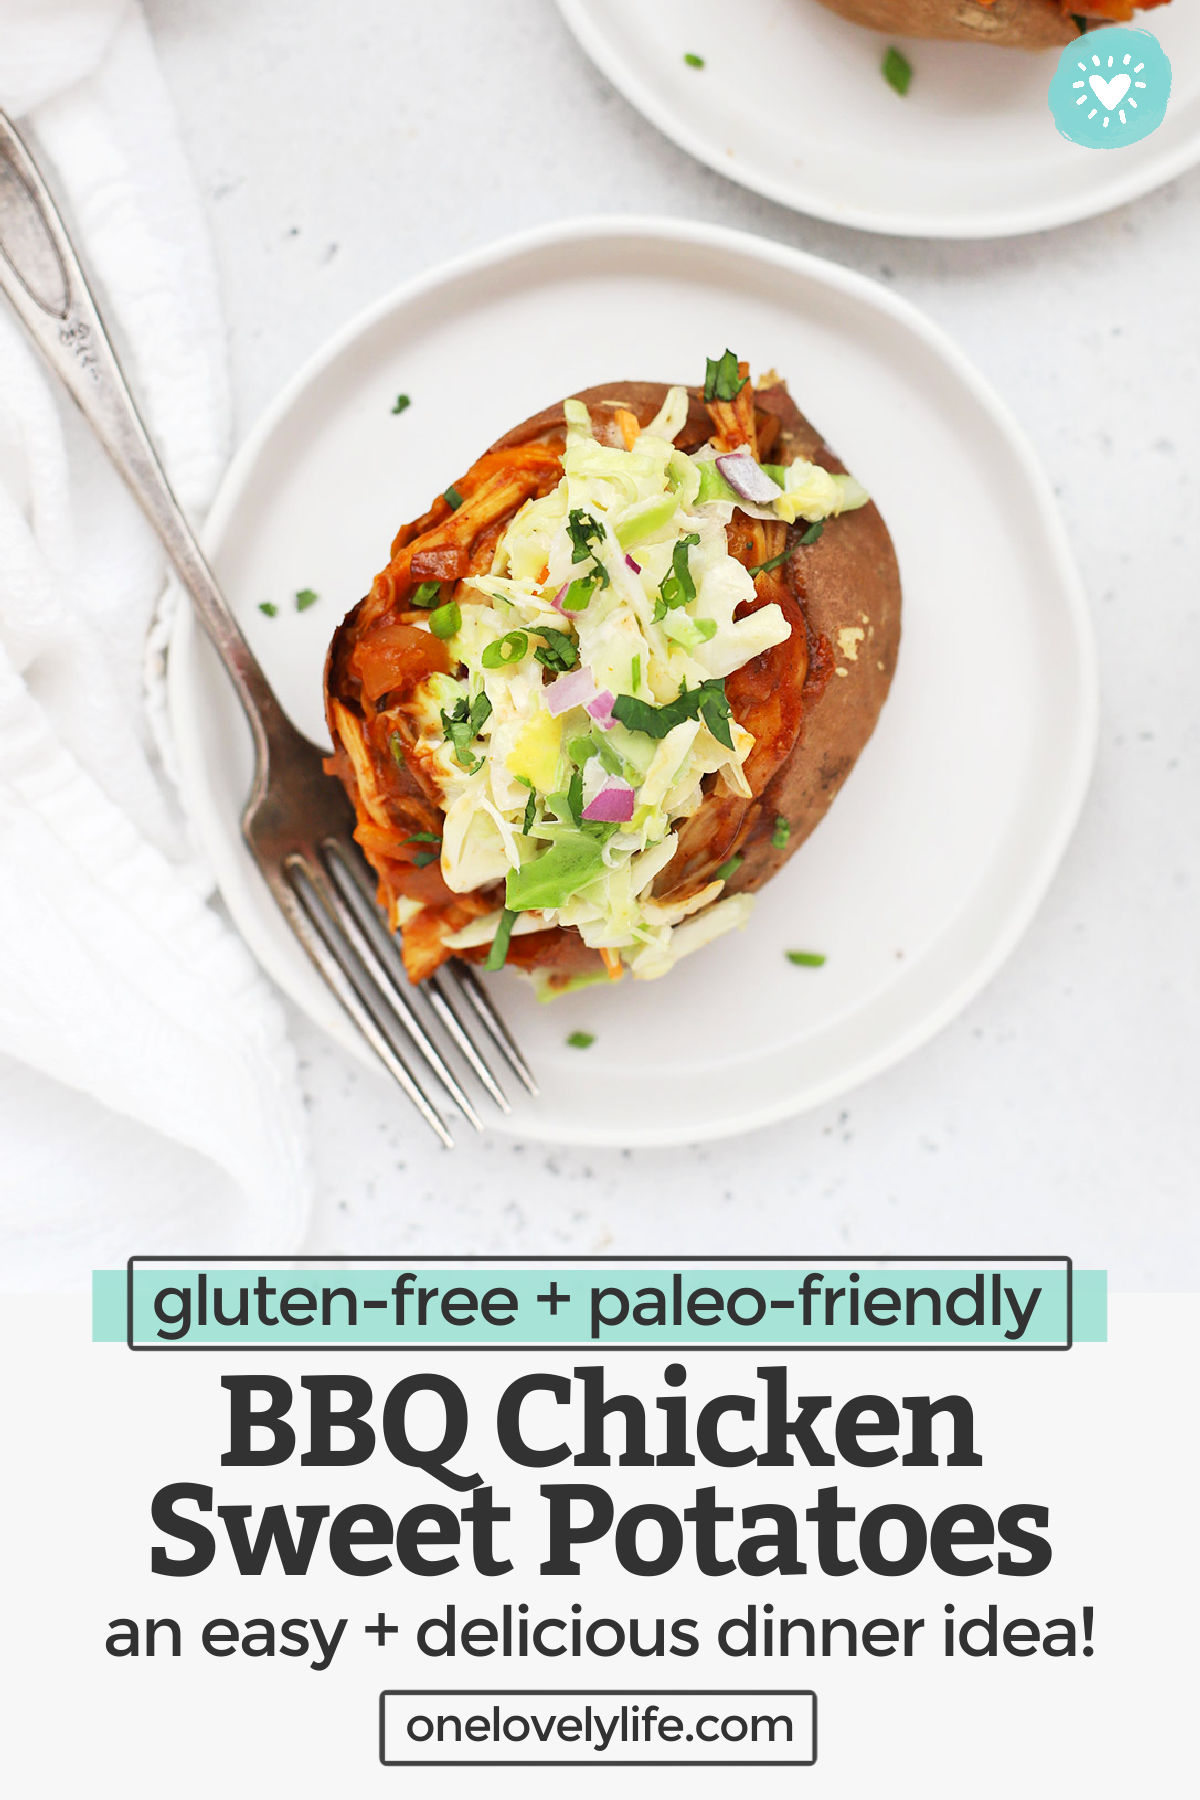 BBQ Chicken Stuffed Sweet Potatoes - Baked sweet potatoes stuffed with tender barbecue chicken and topped with goodies. We love this easy dinner! (Gluten-Free, Paleo, Whole30 Friendly) // Barbecue Chicken Stuffed Sweet Potatoes // Barbecue Sweet Potatoes // Stuffed Sweet Potatoes // Baked Sweet Potato Toppings #paleo #sweetpotato #bakedpotatoe #whole30 #glutenfree #bbq